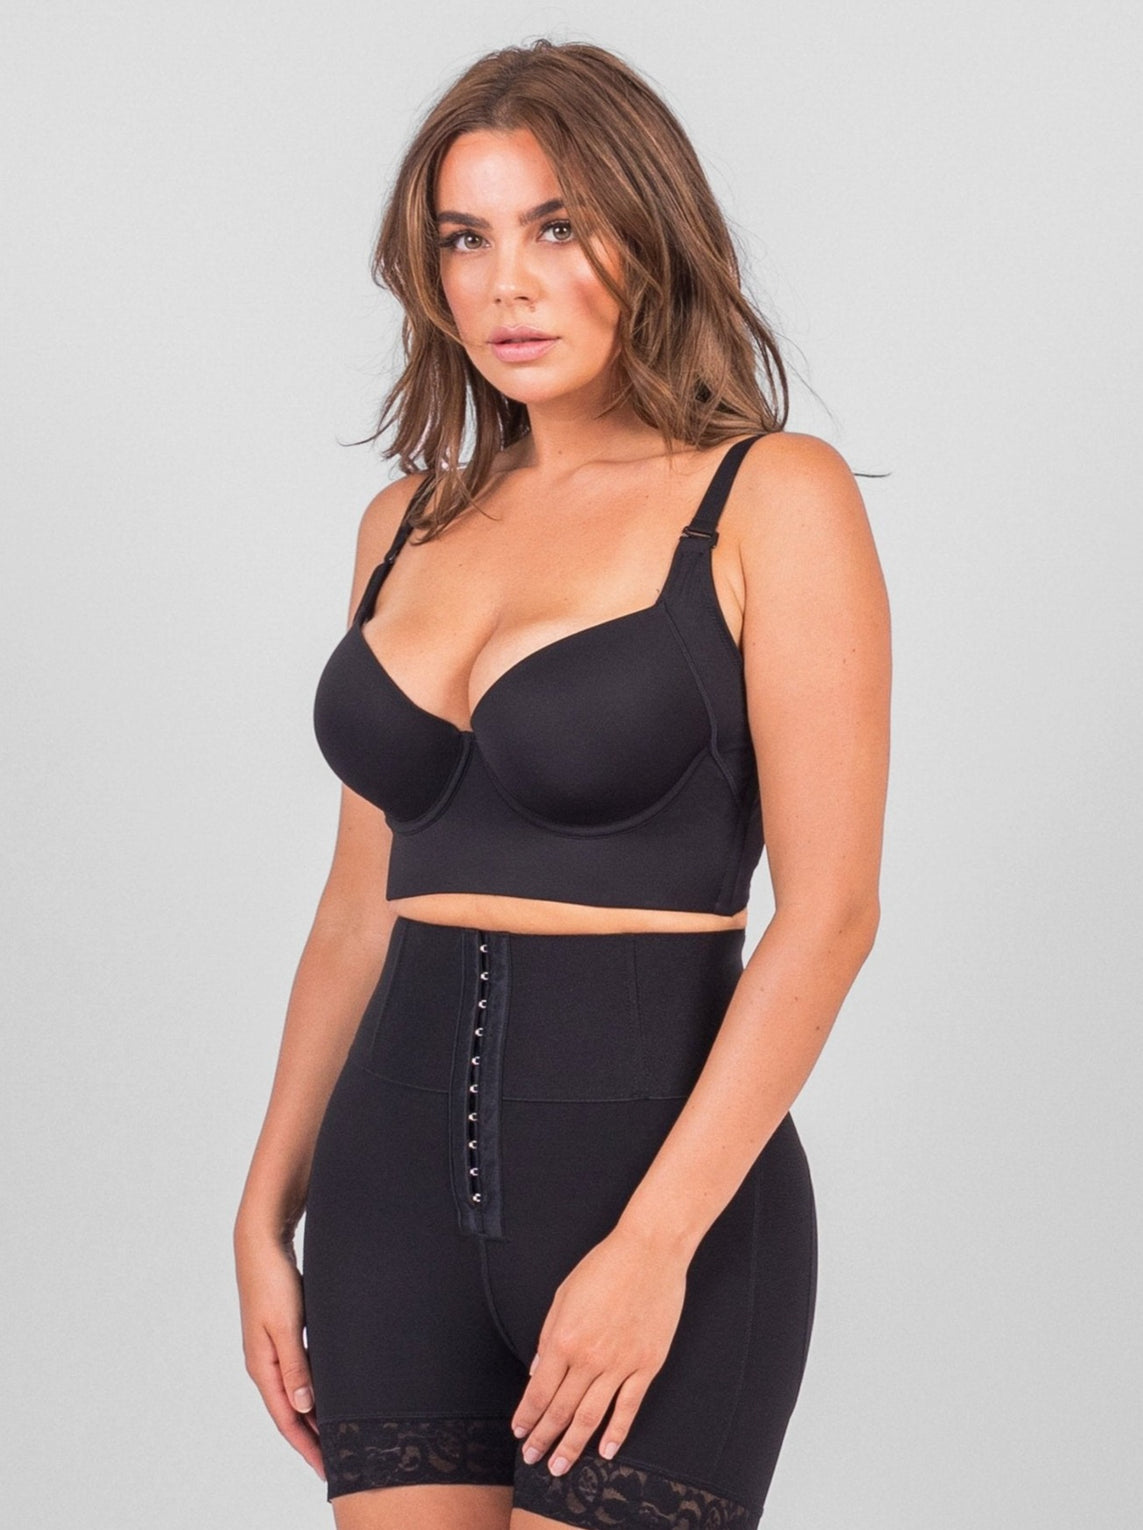 Our Adjustable Wired Push Up bra is restocked ladies 💕 Get yours before  they're gone again ❤️ #sheswaisted #shapewear